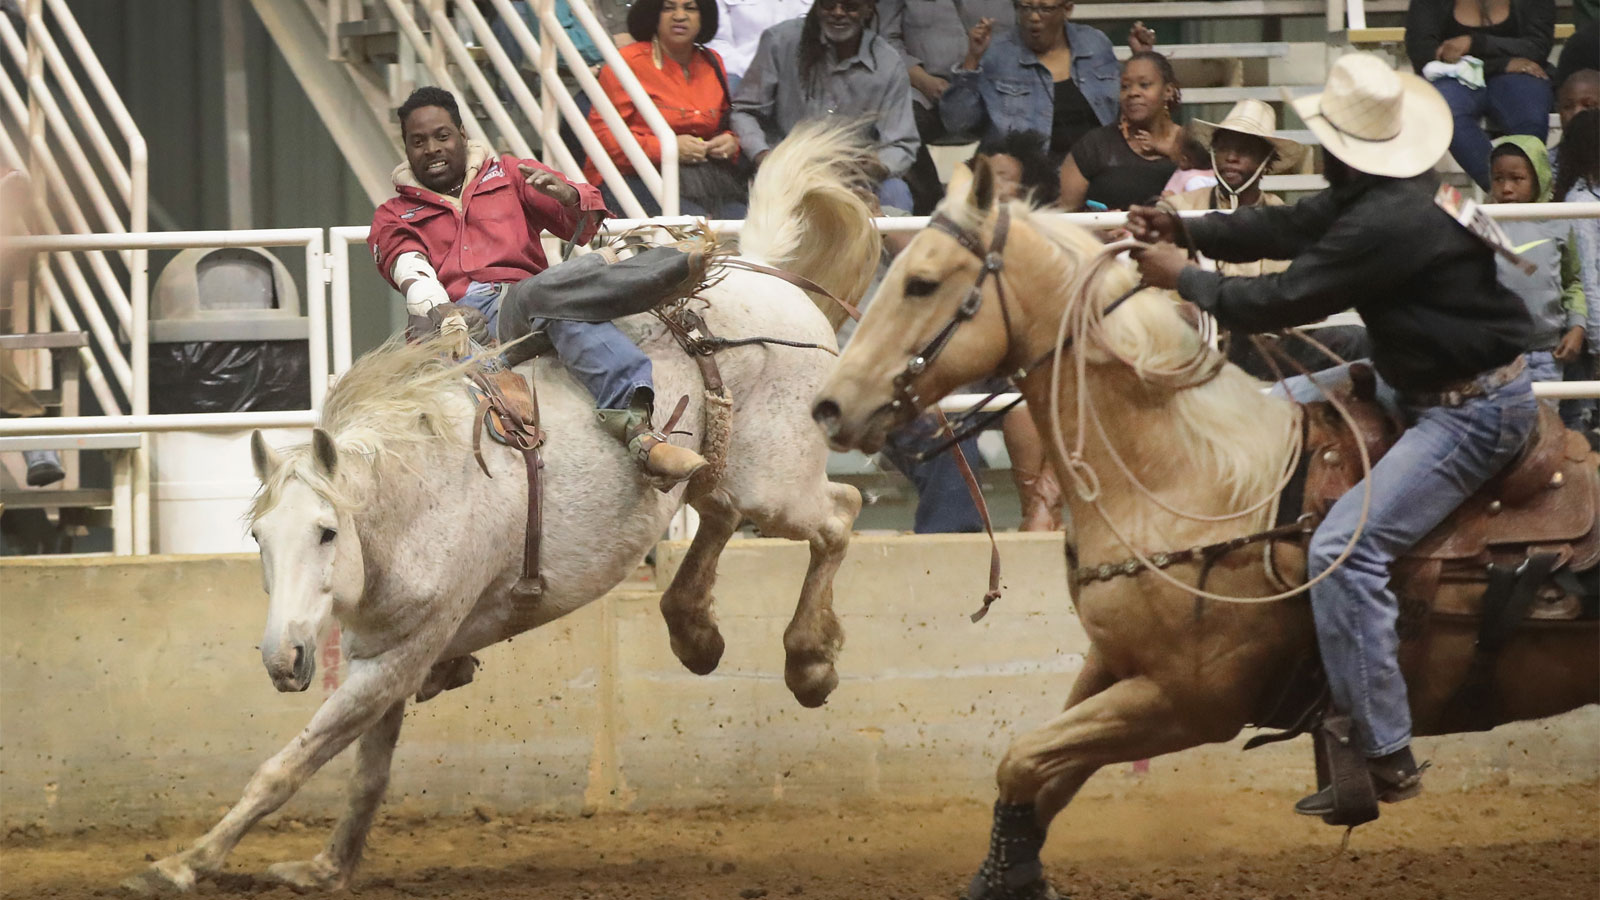 Two Black men on horses in a bronc riding competition